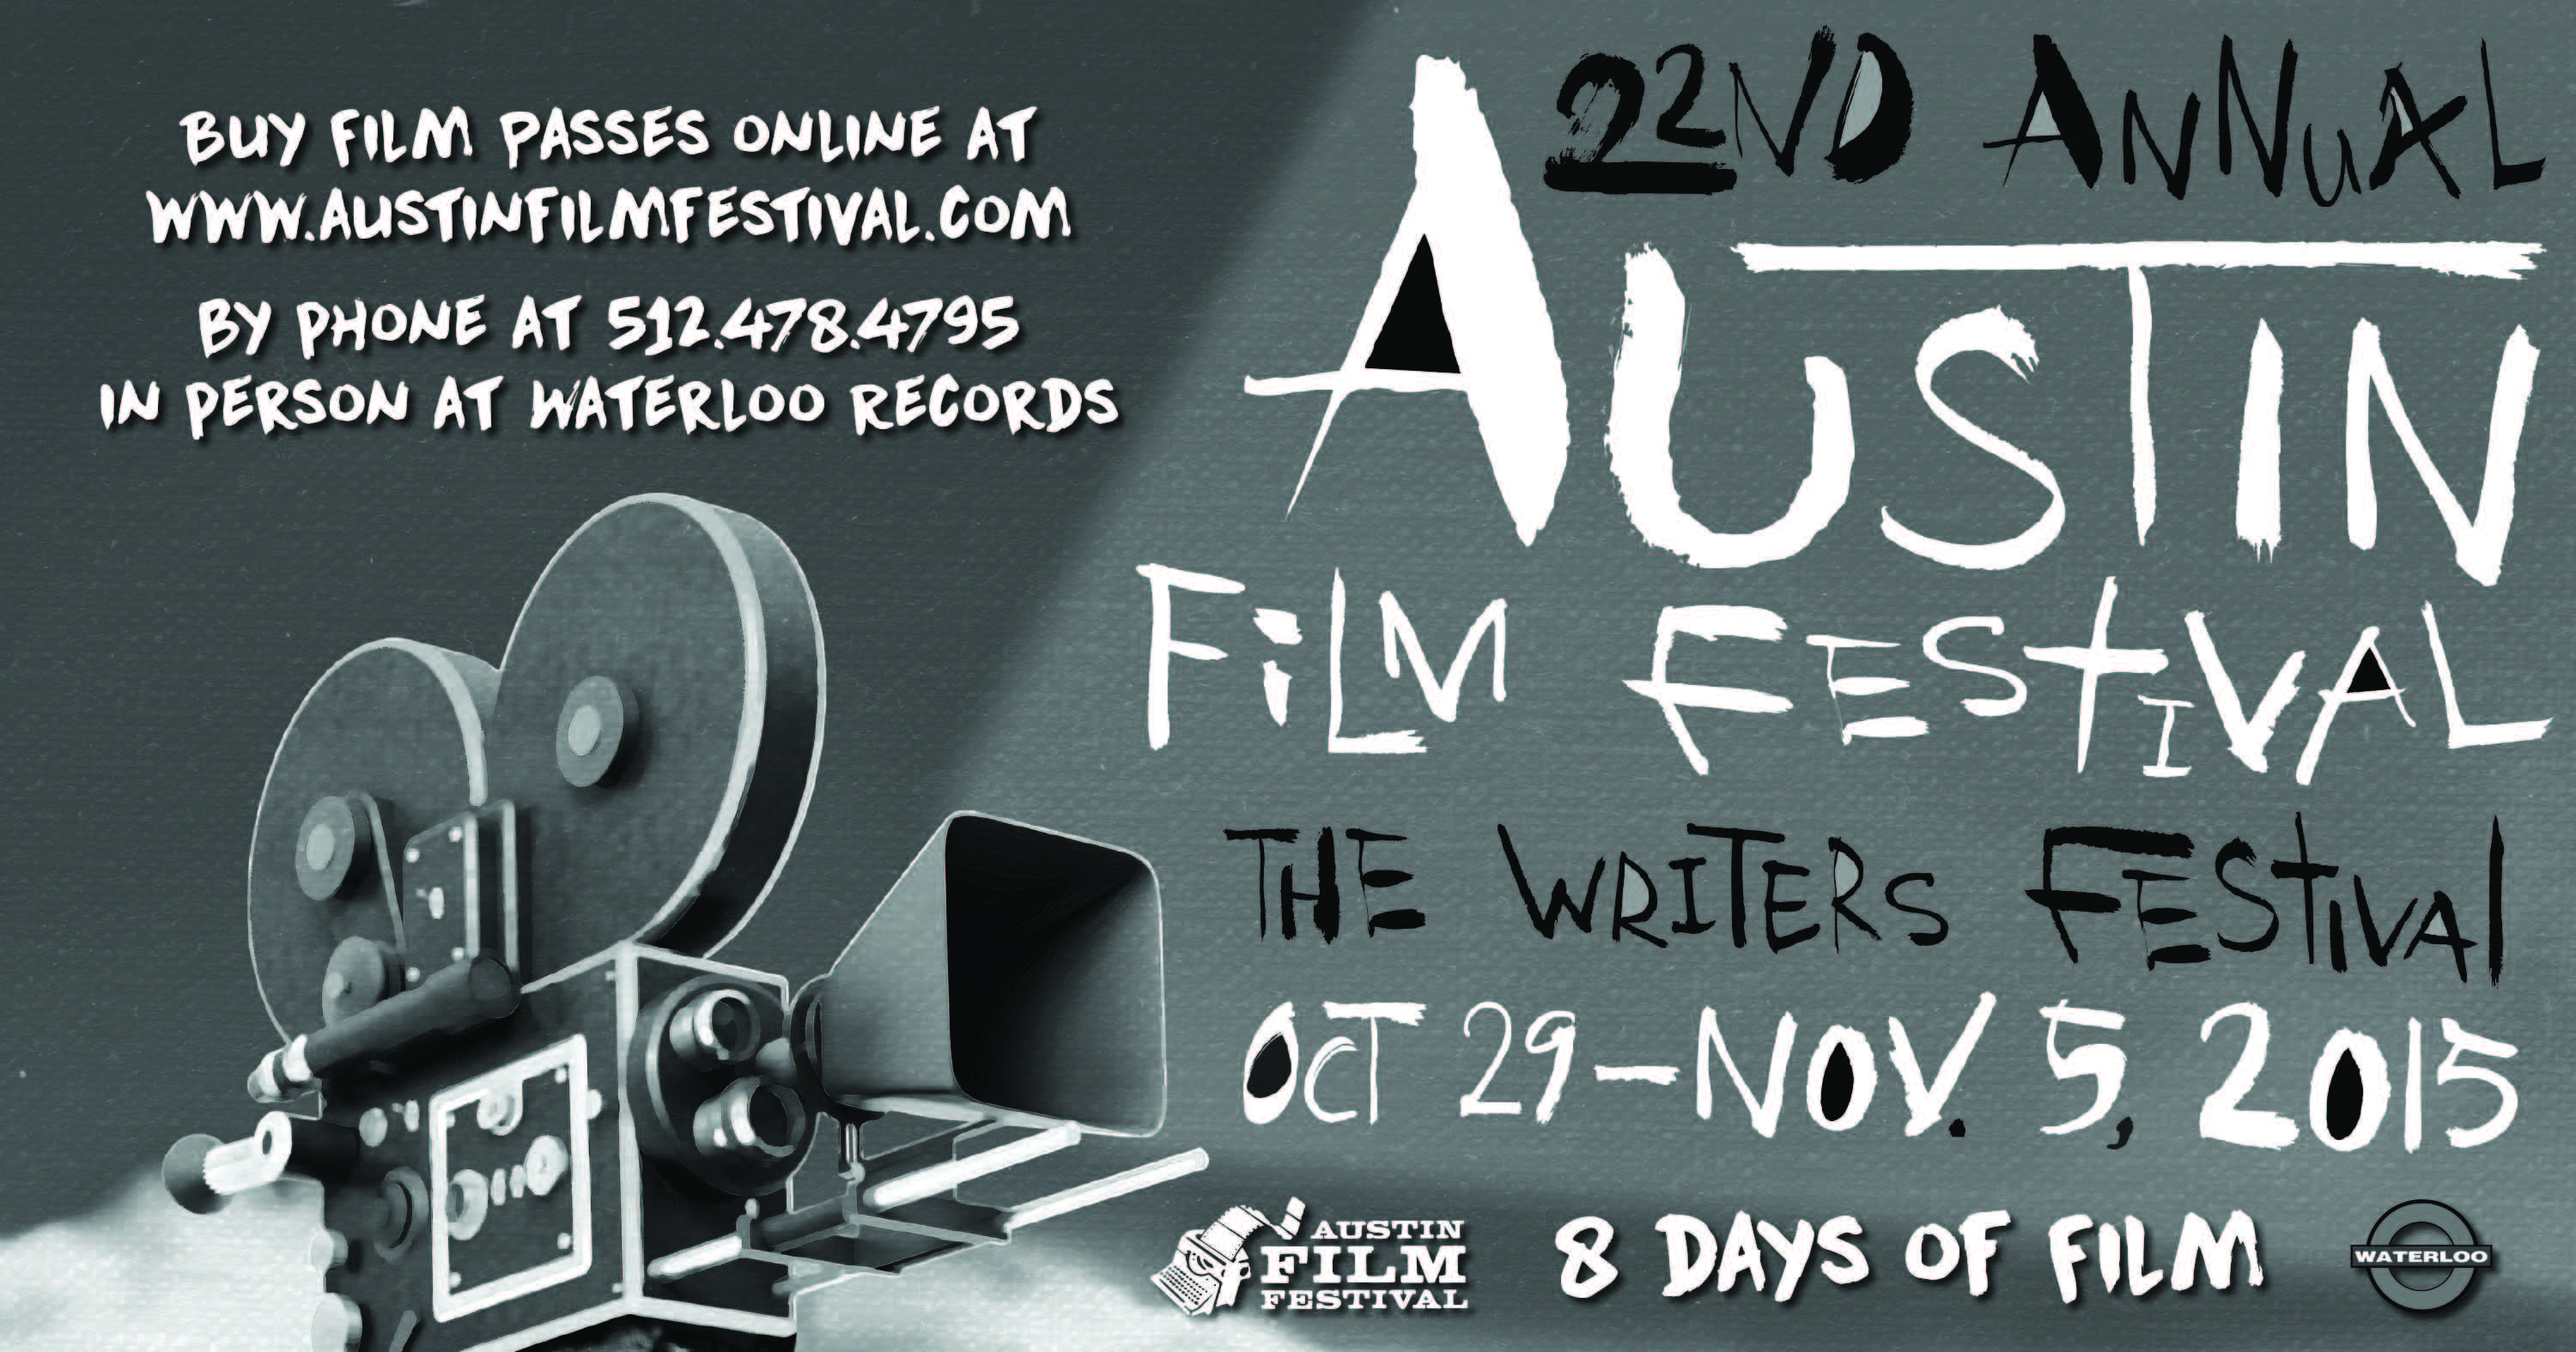 Win passes to the Austin Film Festival Contests Events & Promotions